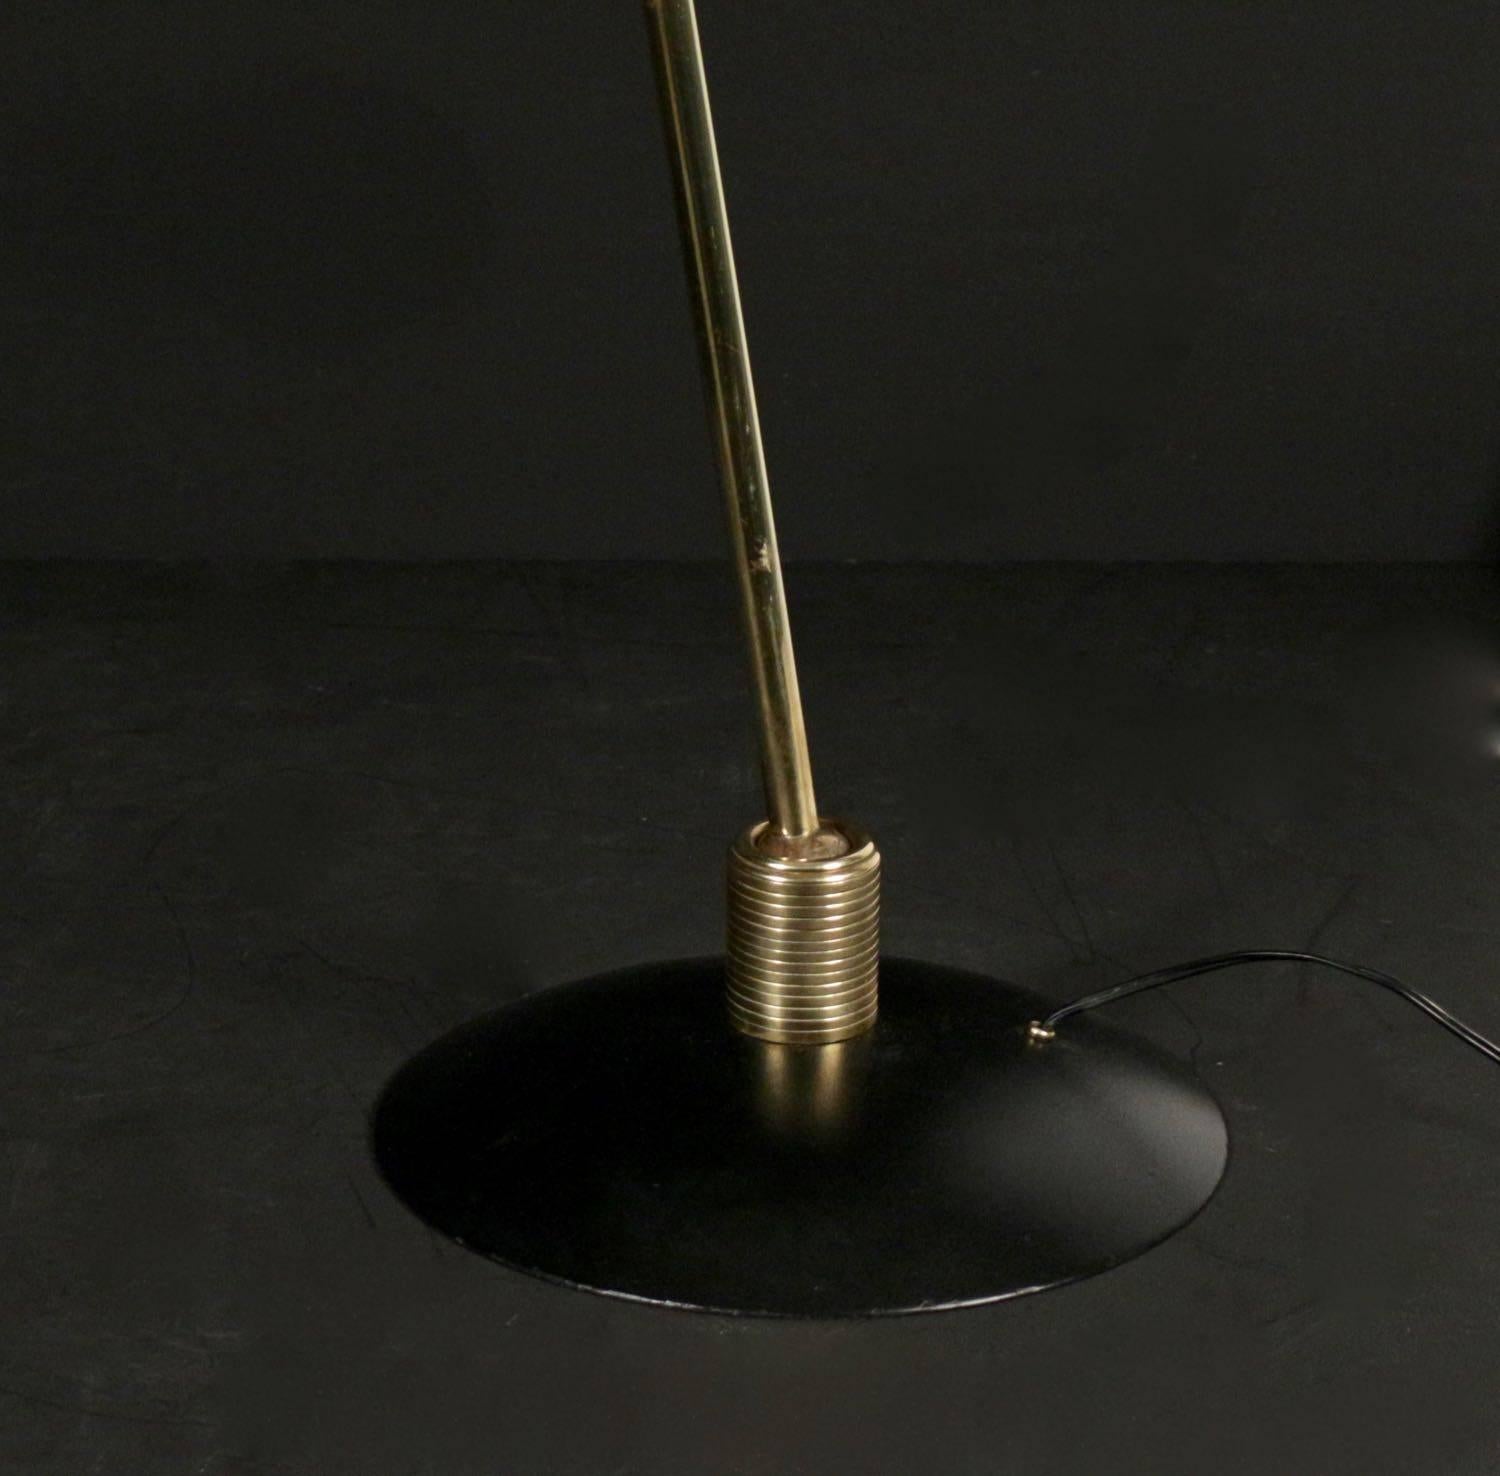 Brass and lacquered metal floor lamp. Consisting of a circular black lacquered base surmounted by an adjustable ball geared articulated foot and a double lampshade. The food ends with a double lampshade attached to a brass support equipped with two